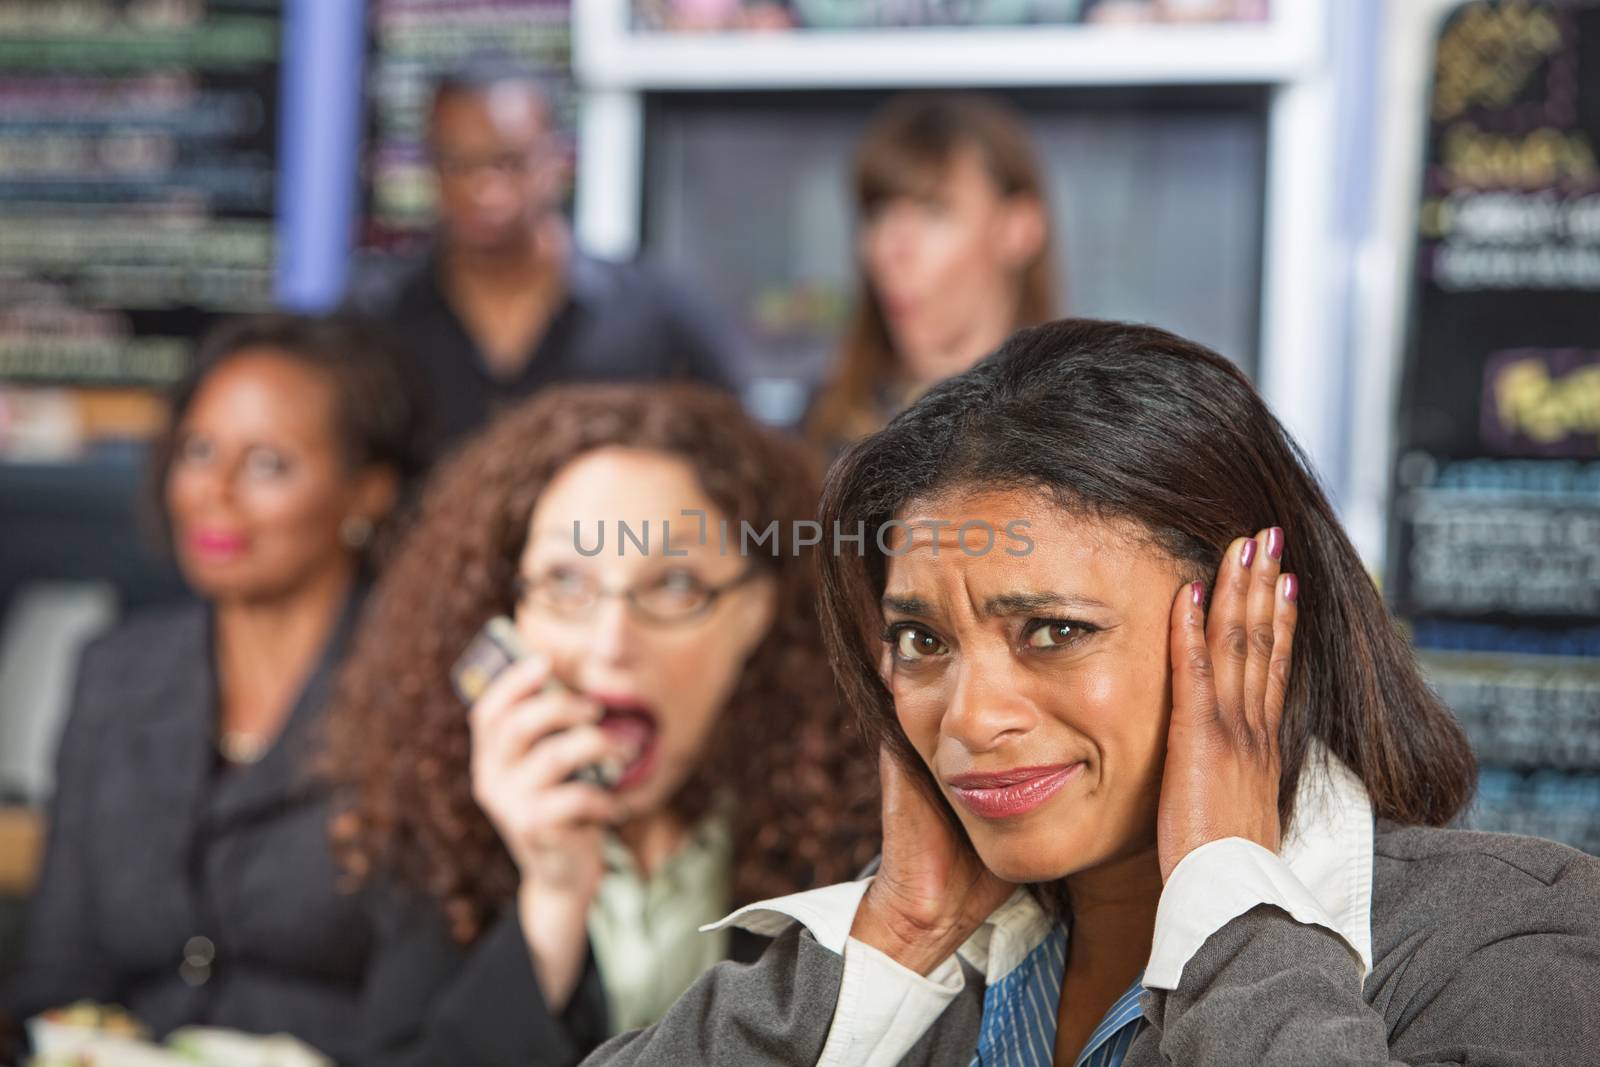 Bothered business person covering ears while person talks